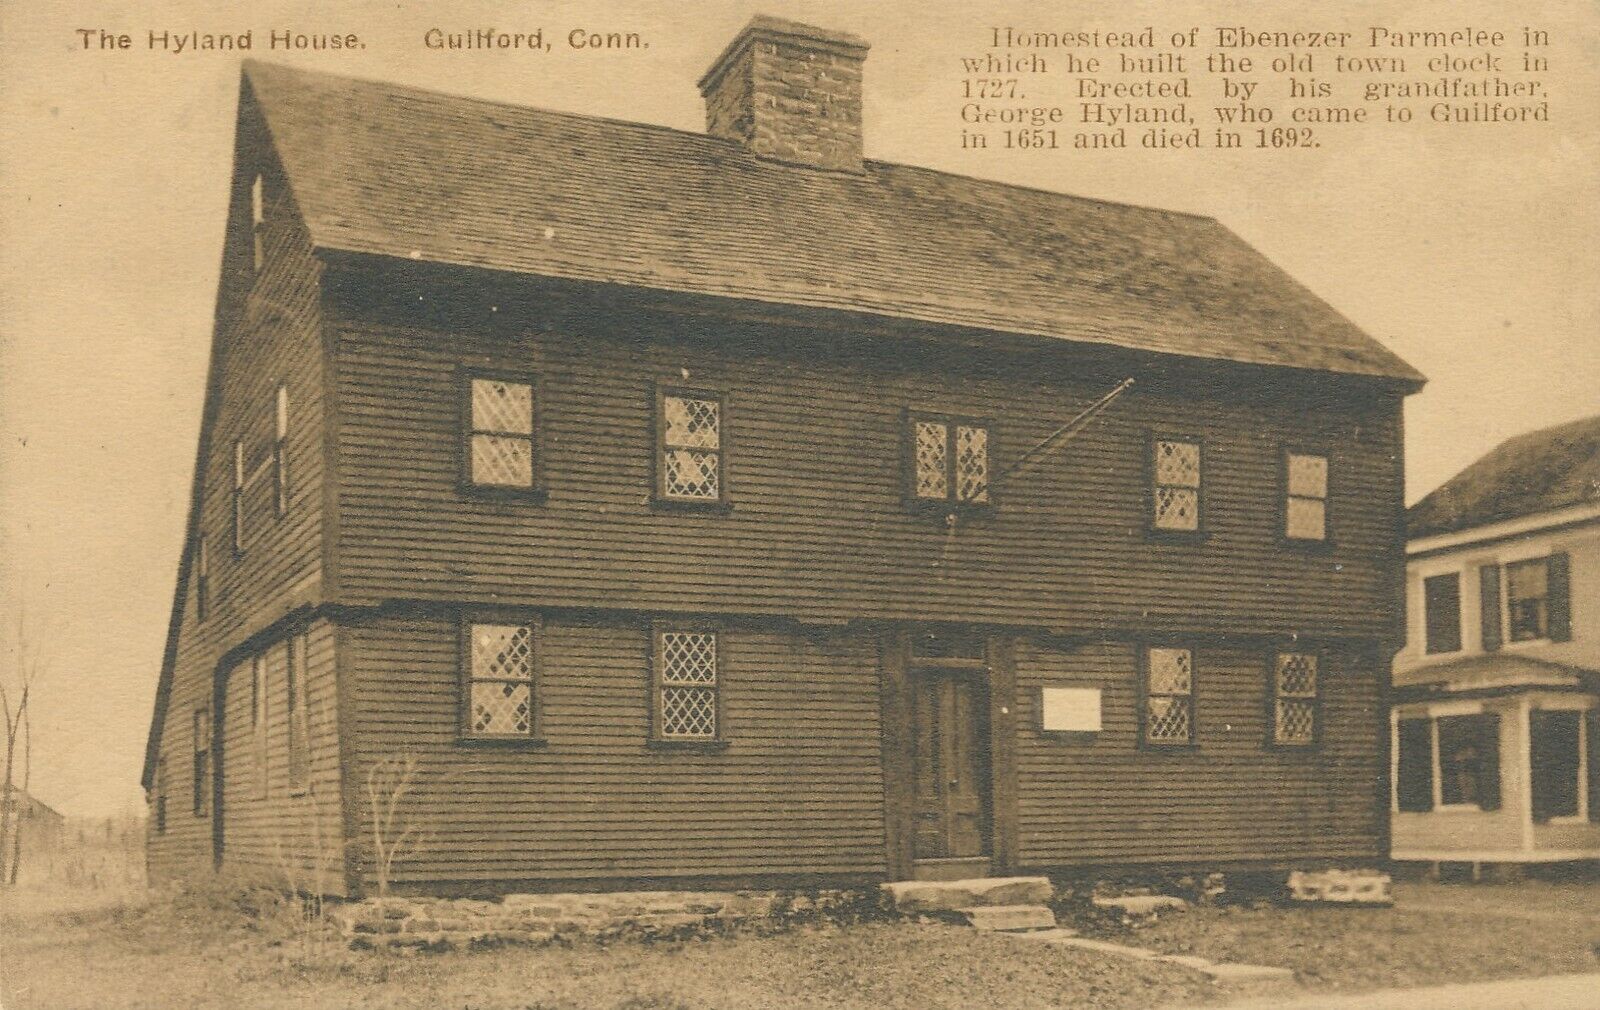 GUILFORD CT – The Hyland House Ebenezer Parmelee Homestead